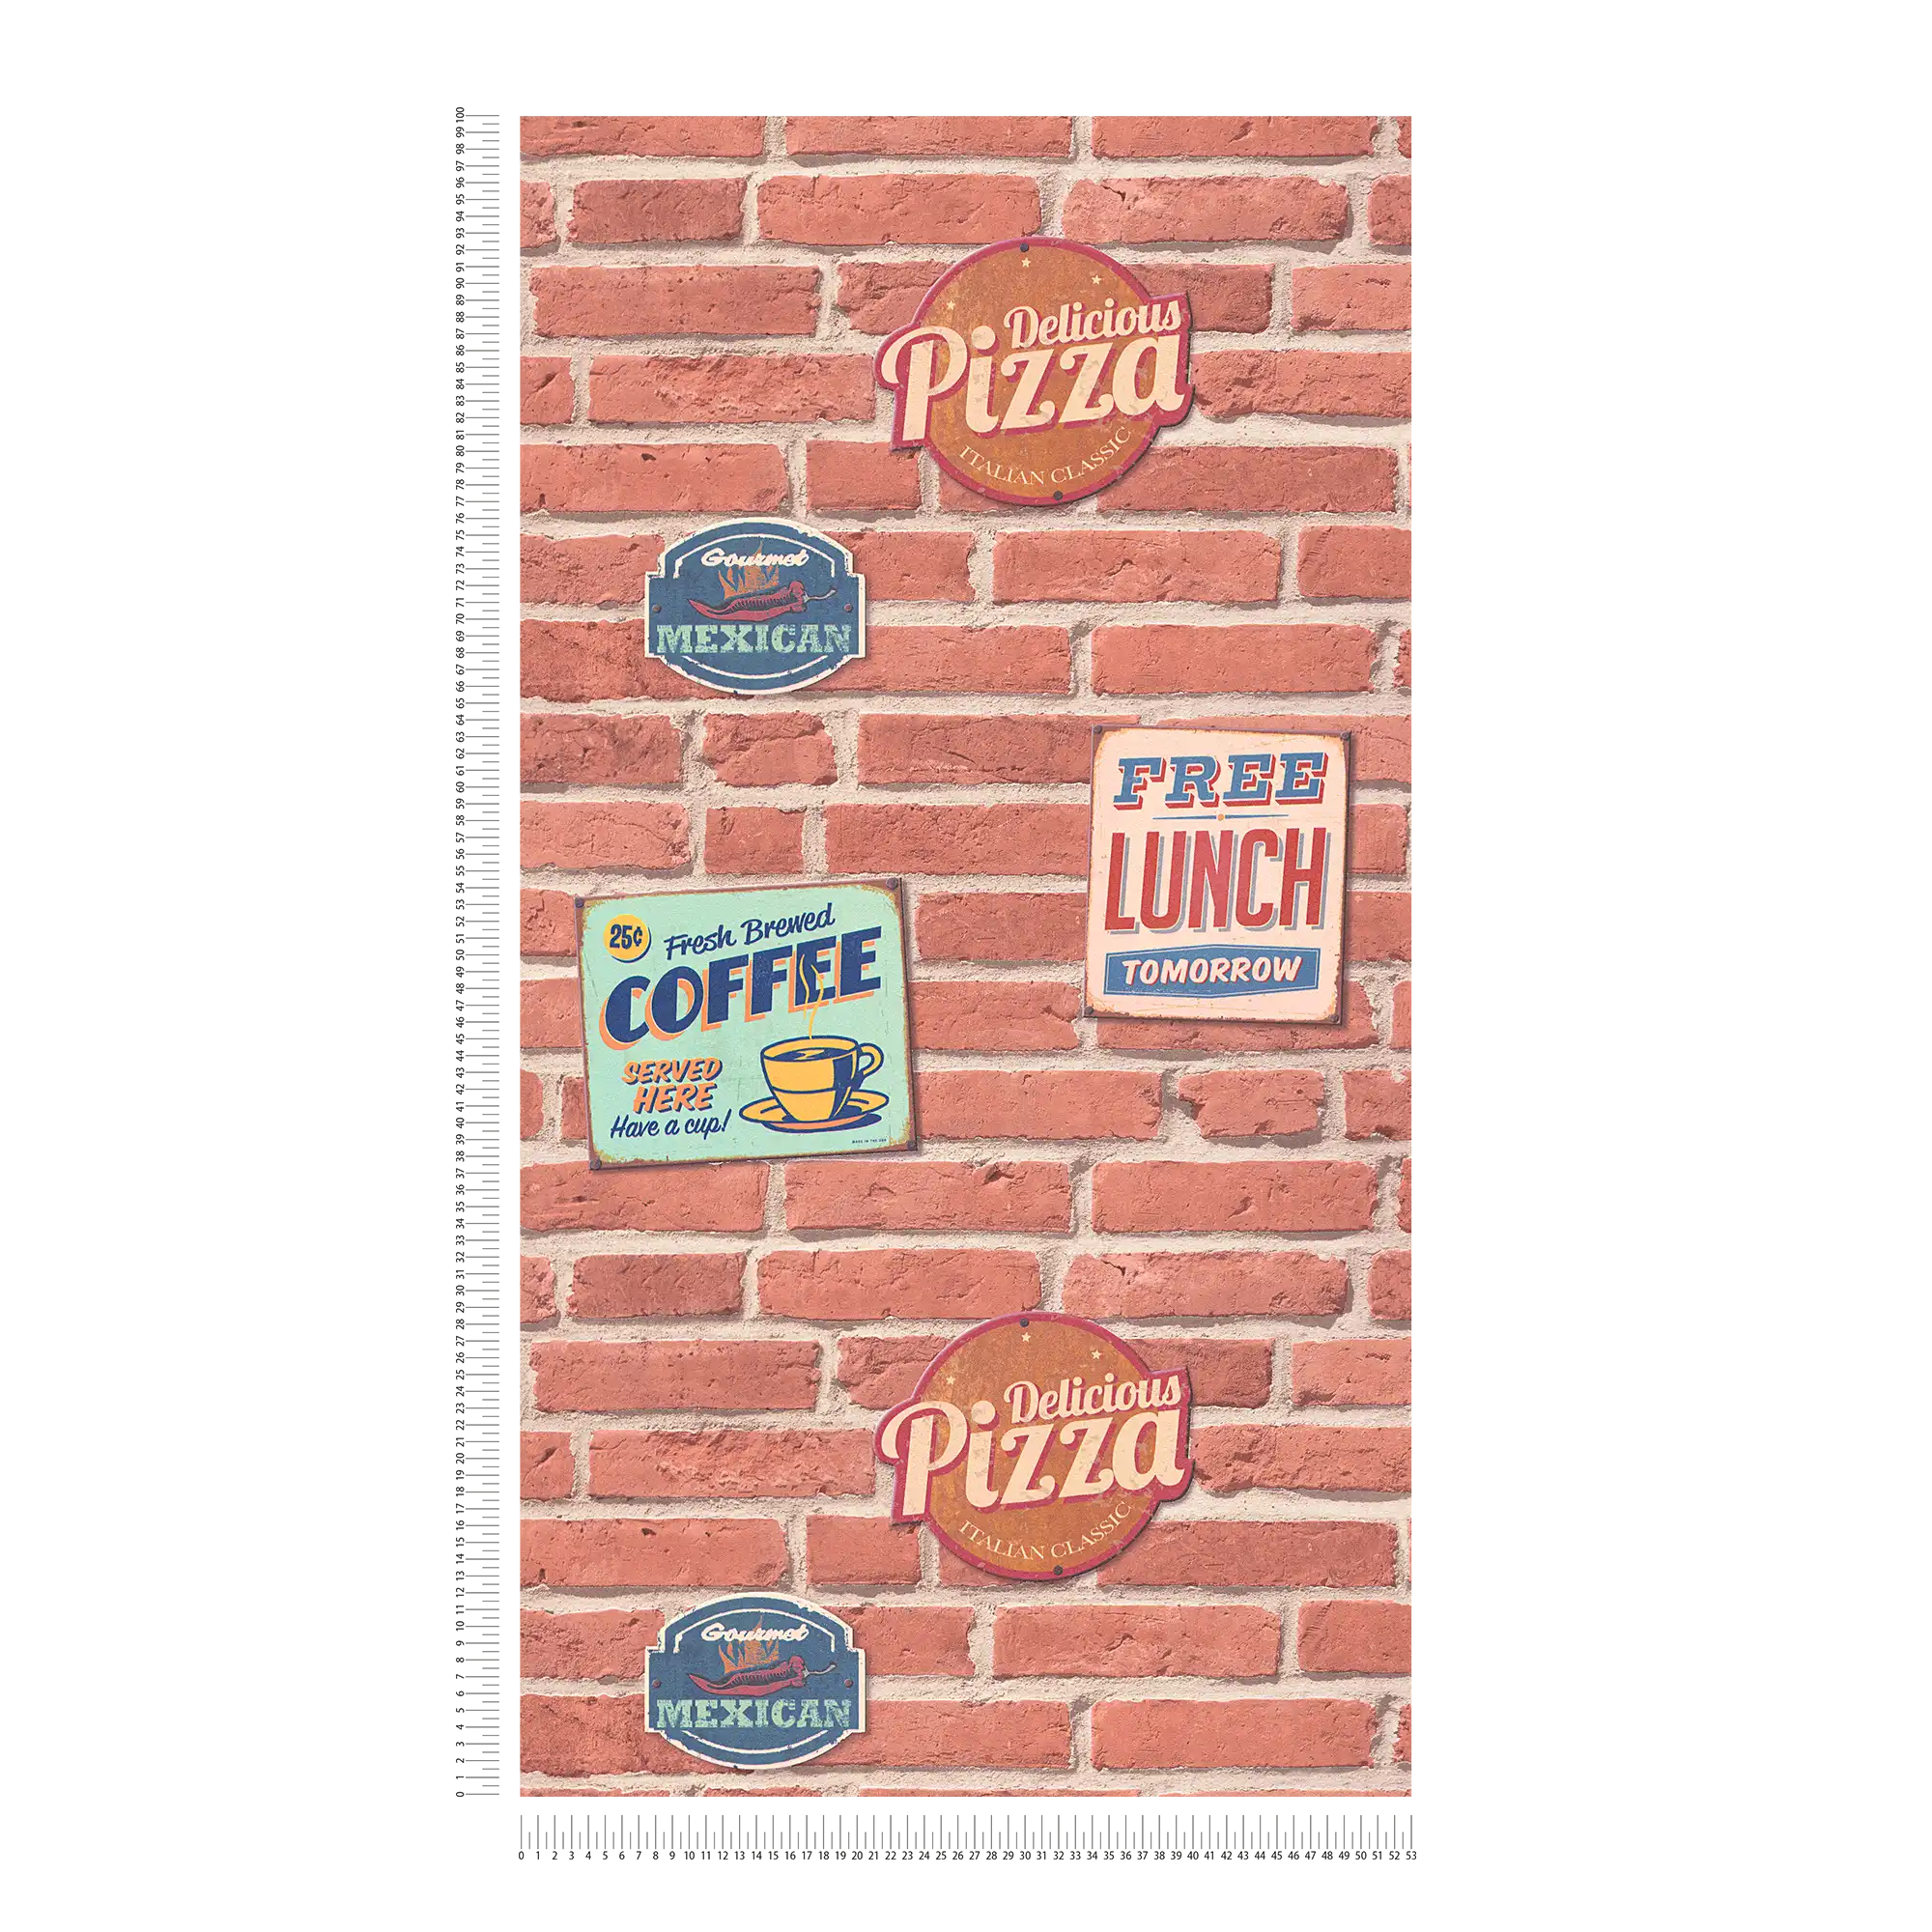             Stone wallpaper brick wall American Diner style - Colorful
        